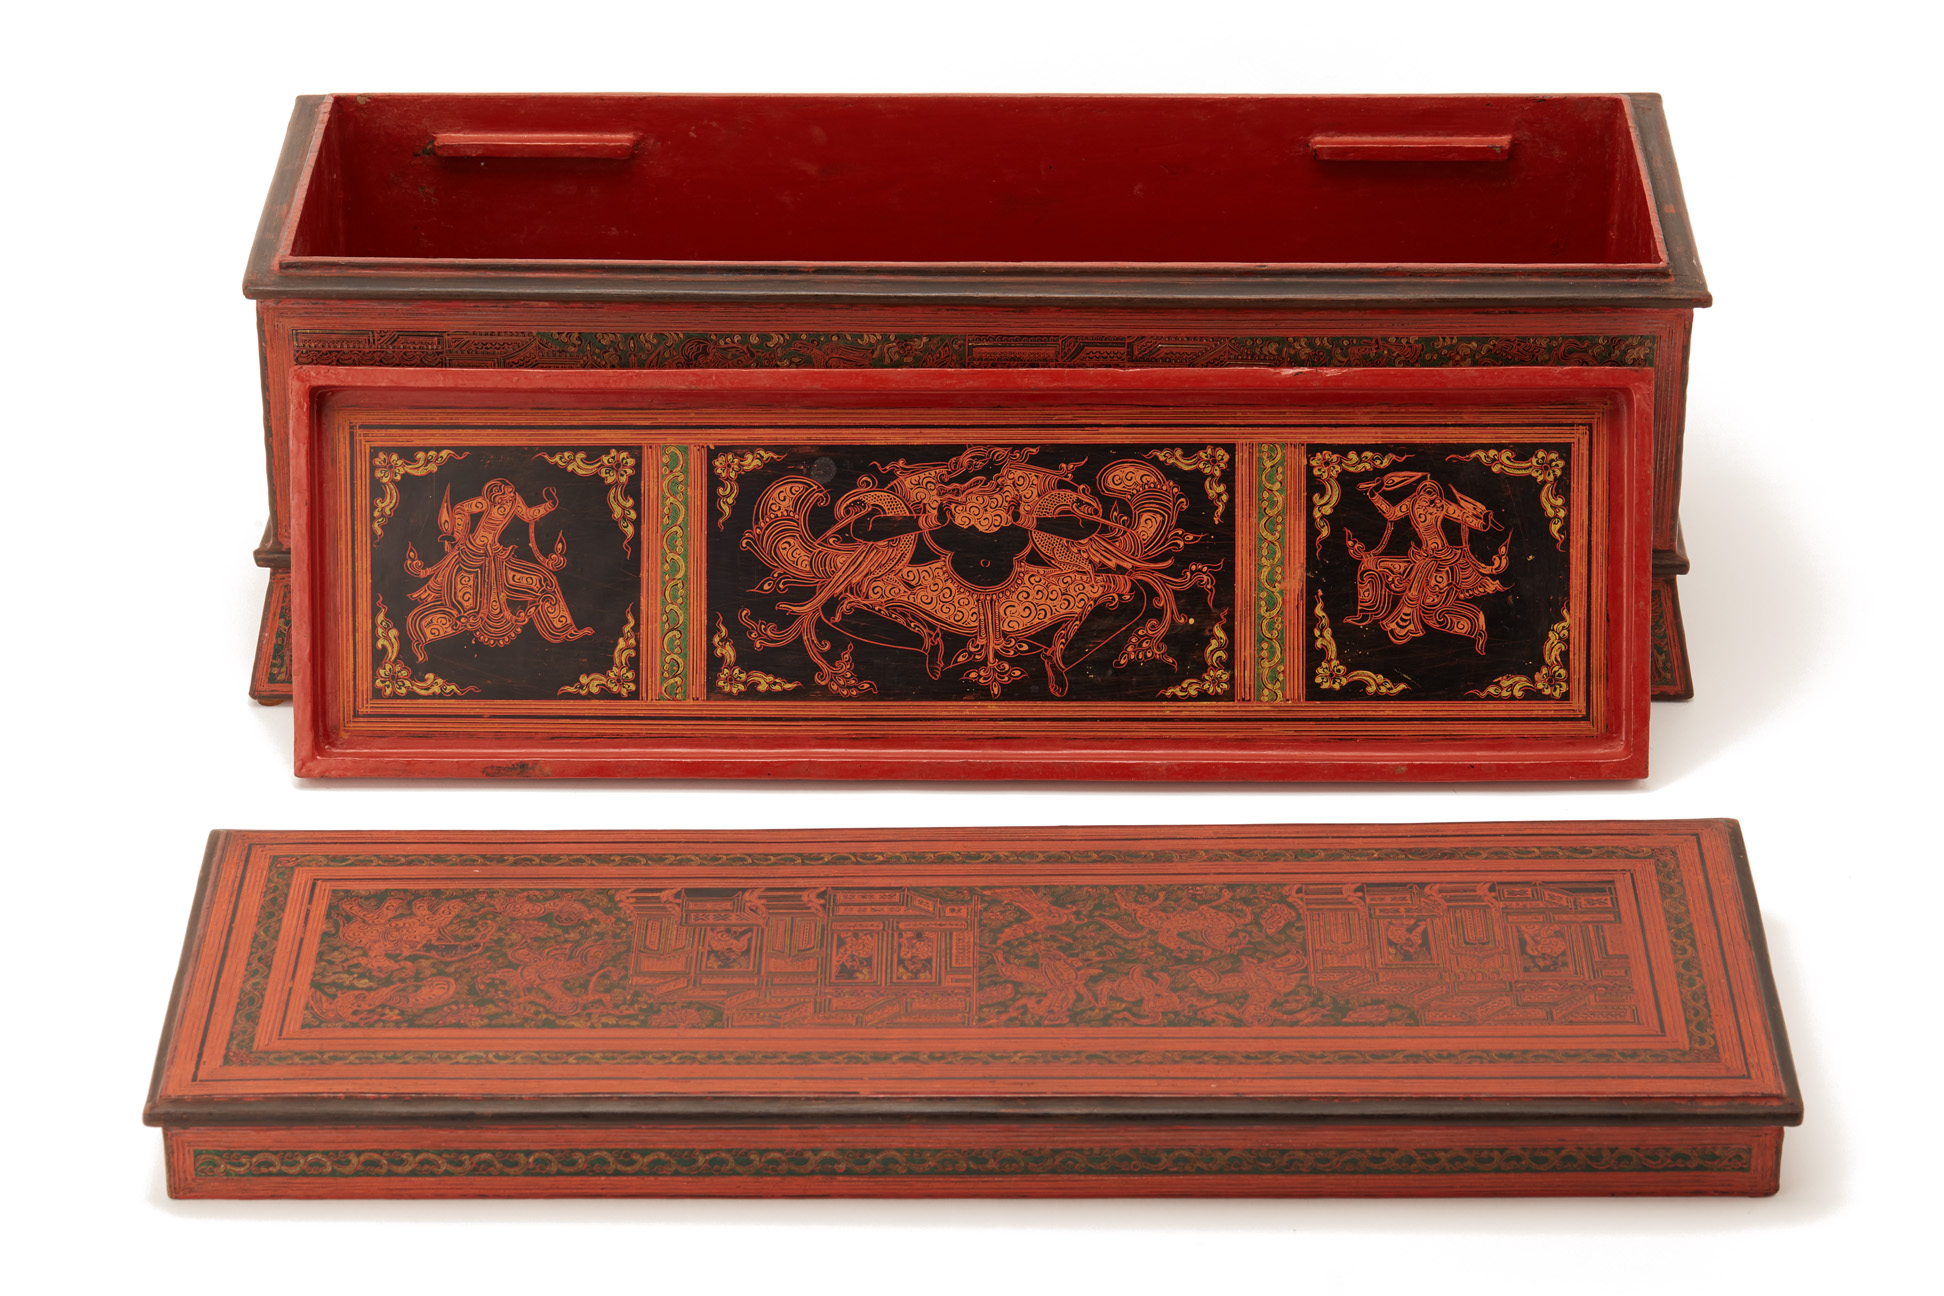 A BURMESE RED LACQUER RECTANGULAR BOX AND COVER - Image 2 of 2